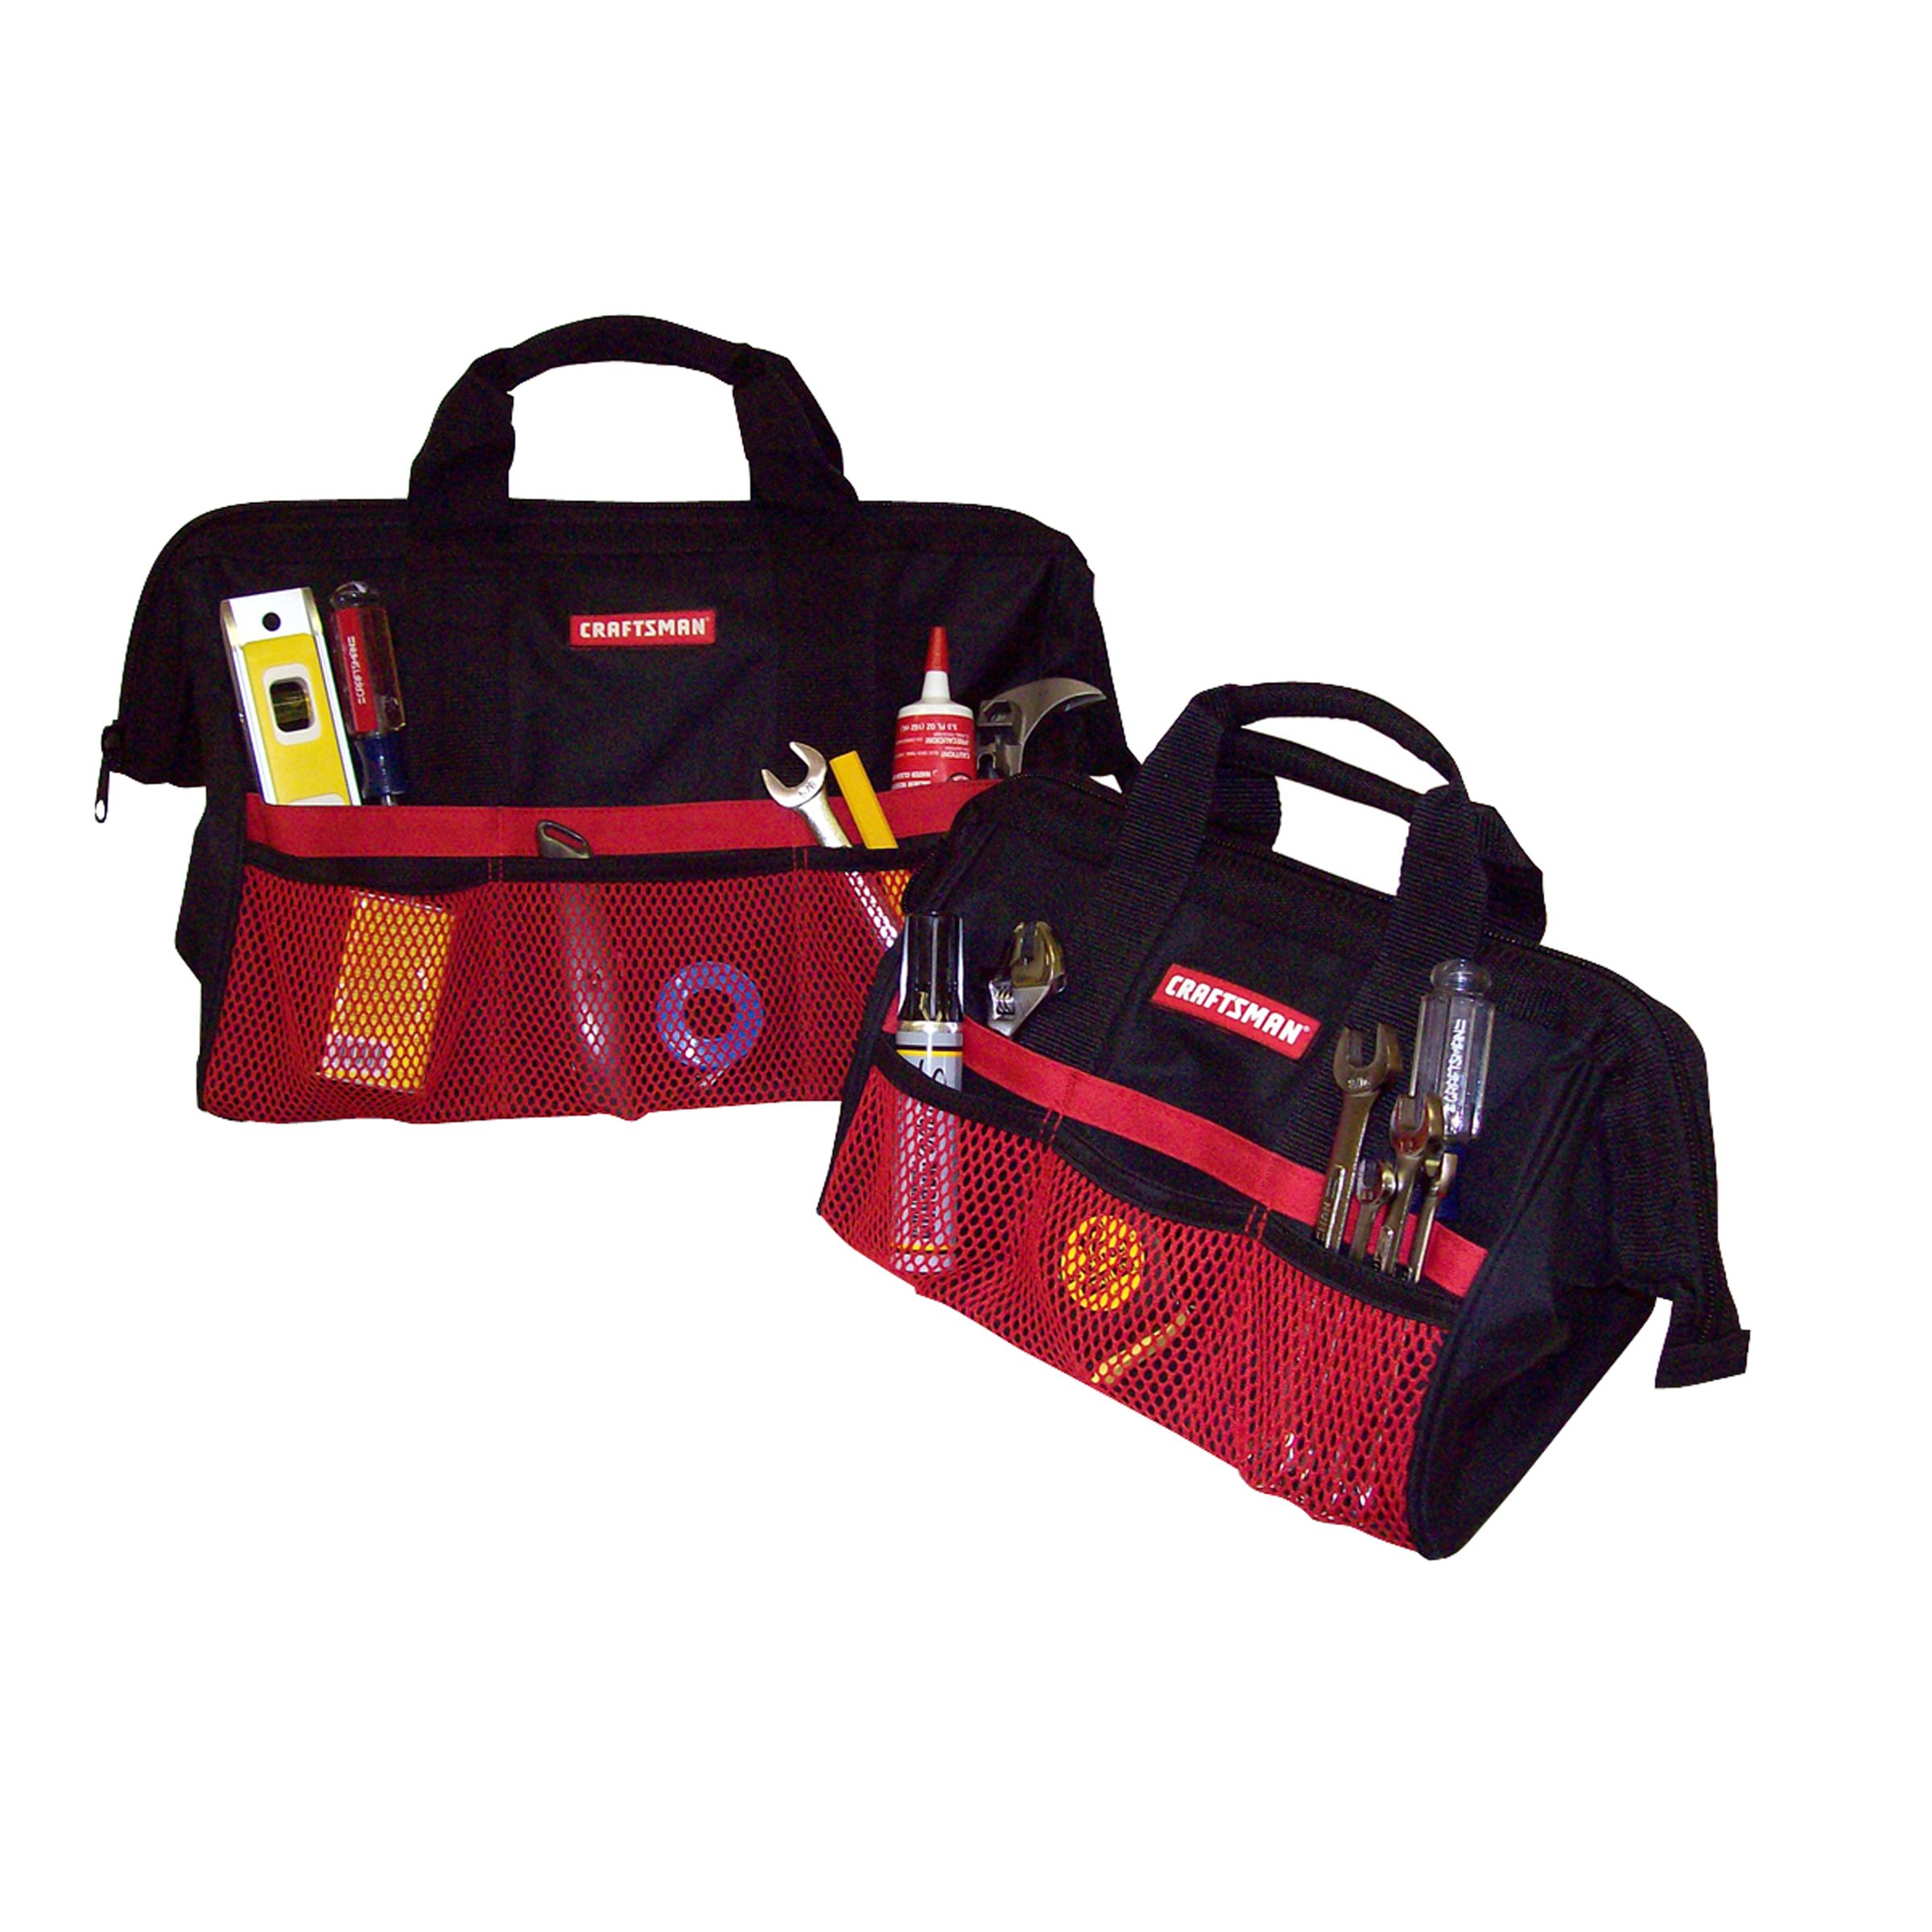 Craftsman 13″ and 18″ Tool Bag Combo Set Only $9.99!